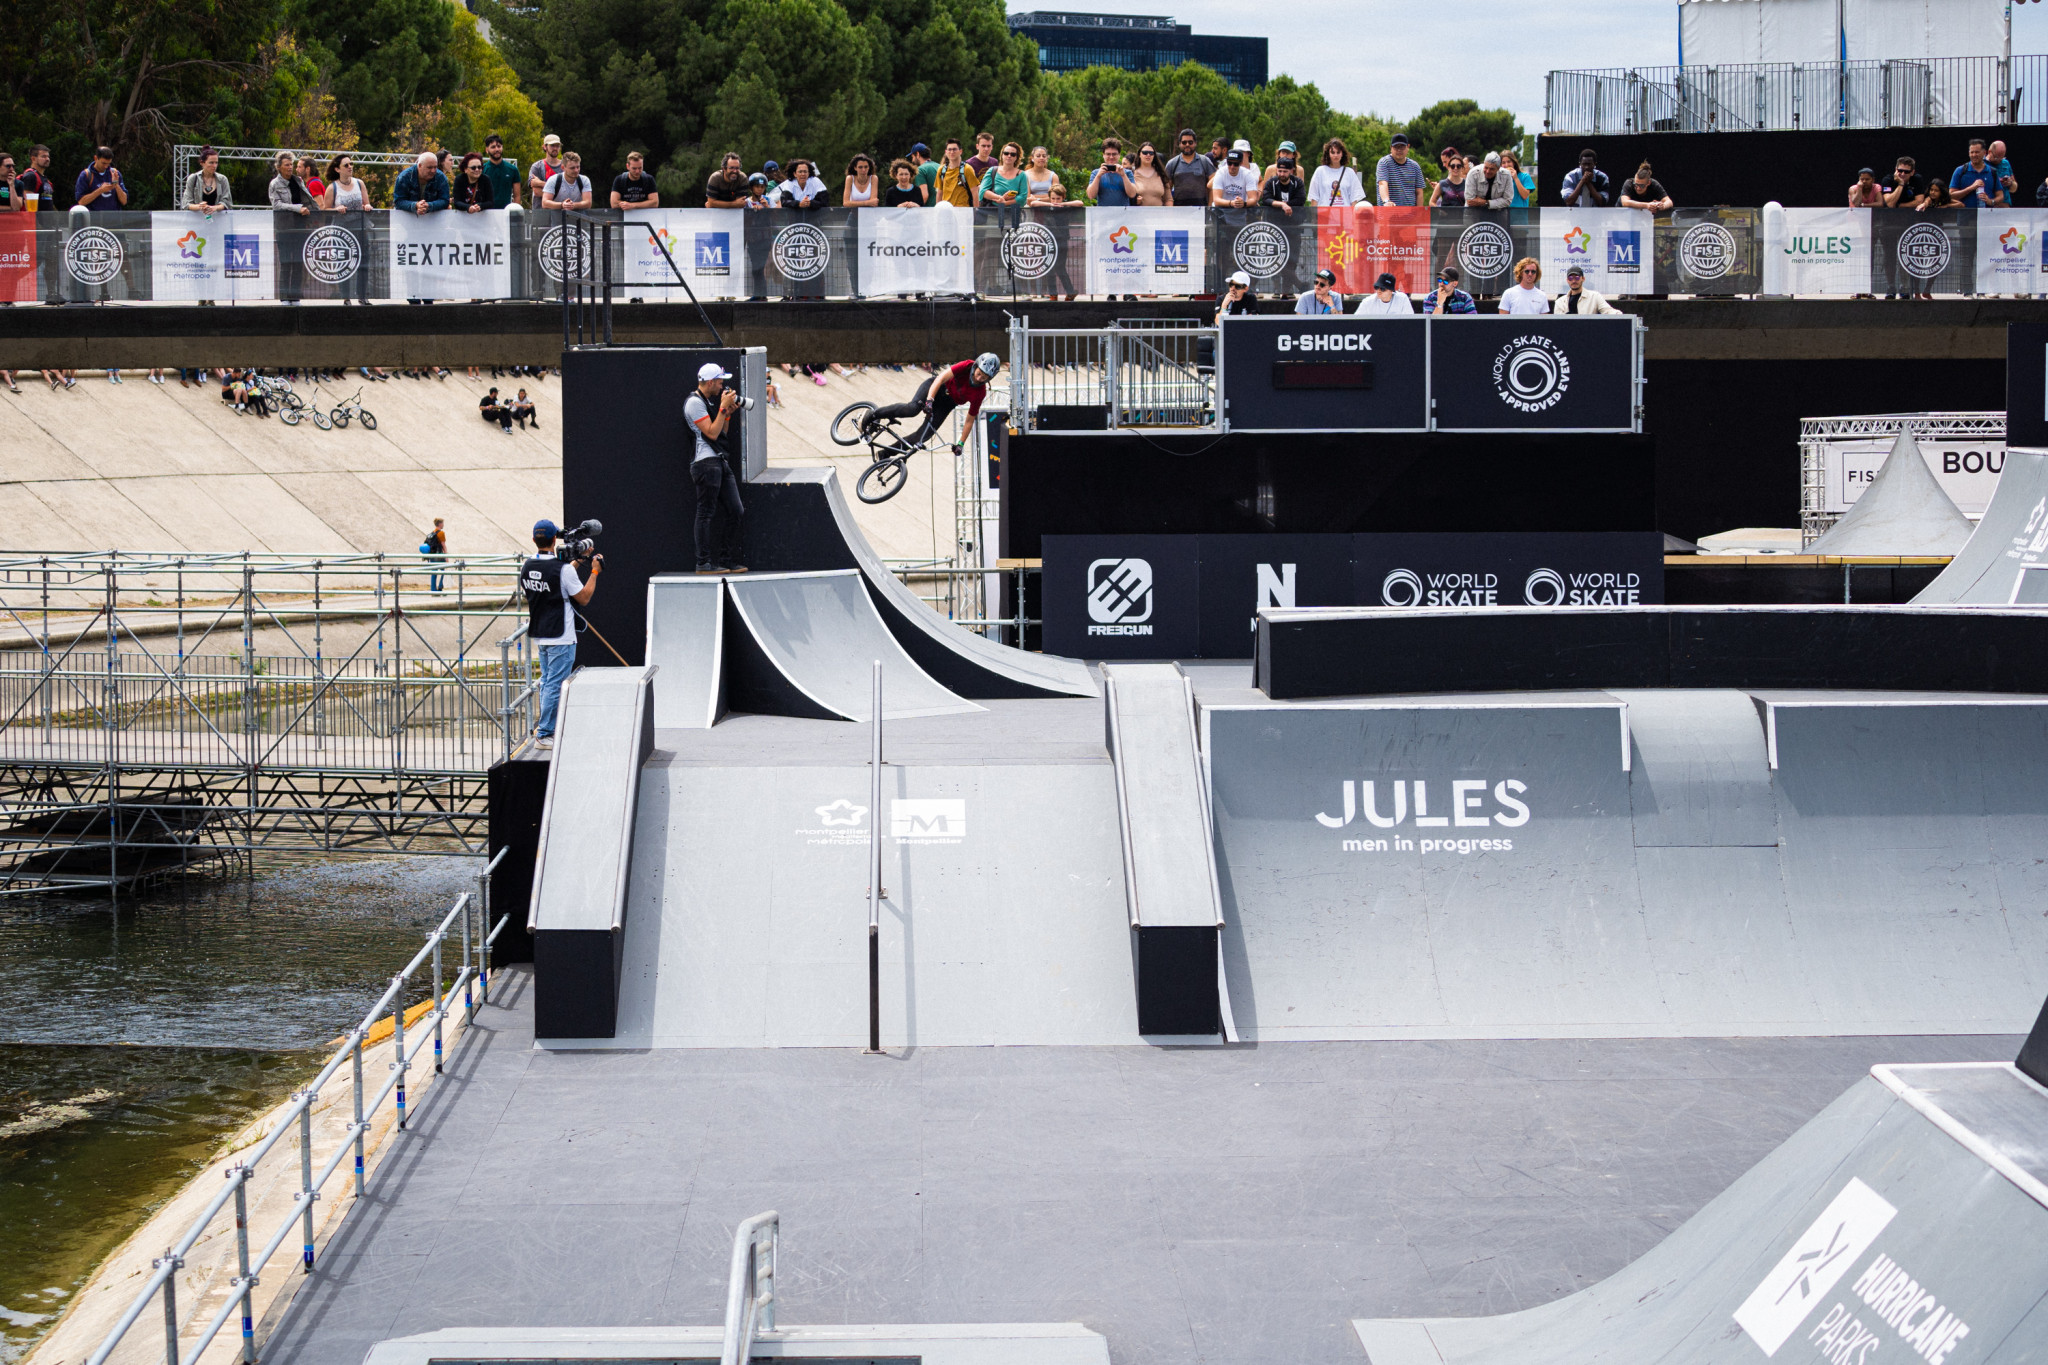 The venues for FISE 2022 are situated on the banks of the River Lez in Montpellier, creating a valley of sport for spectators to watch from above ©Hurricane - FISE